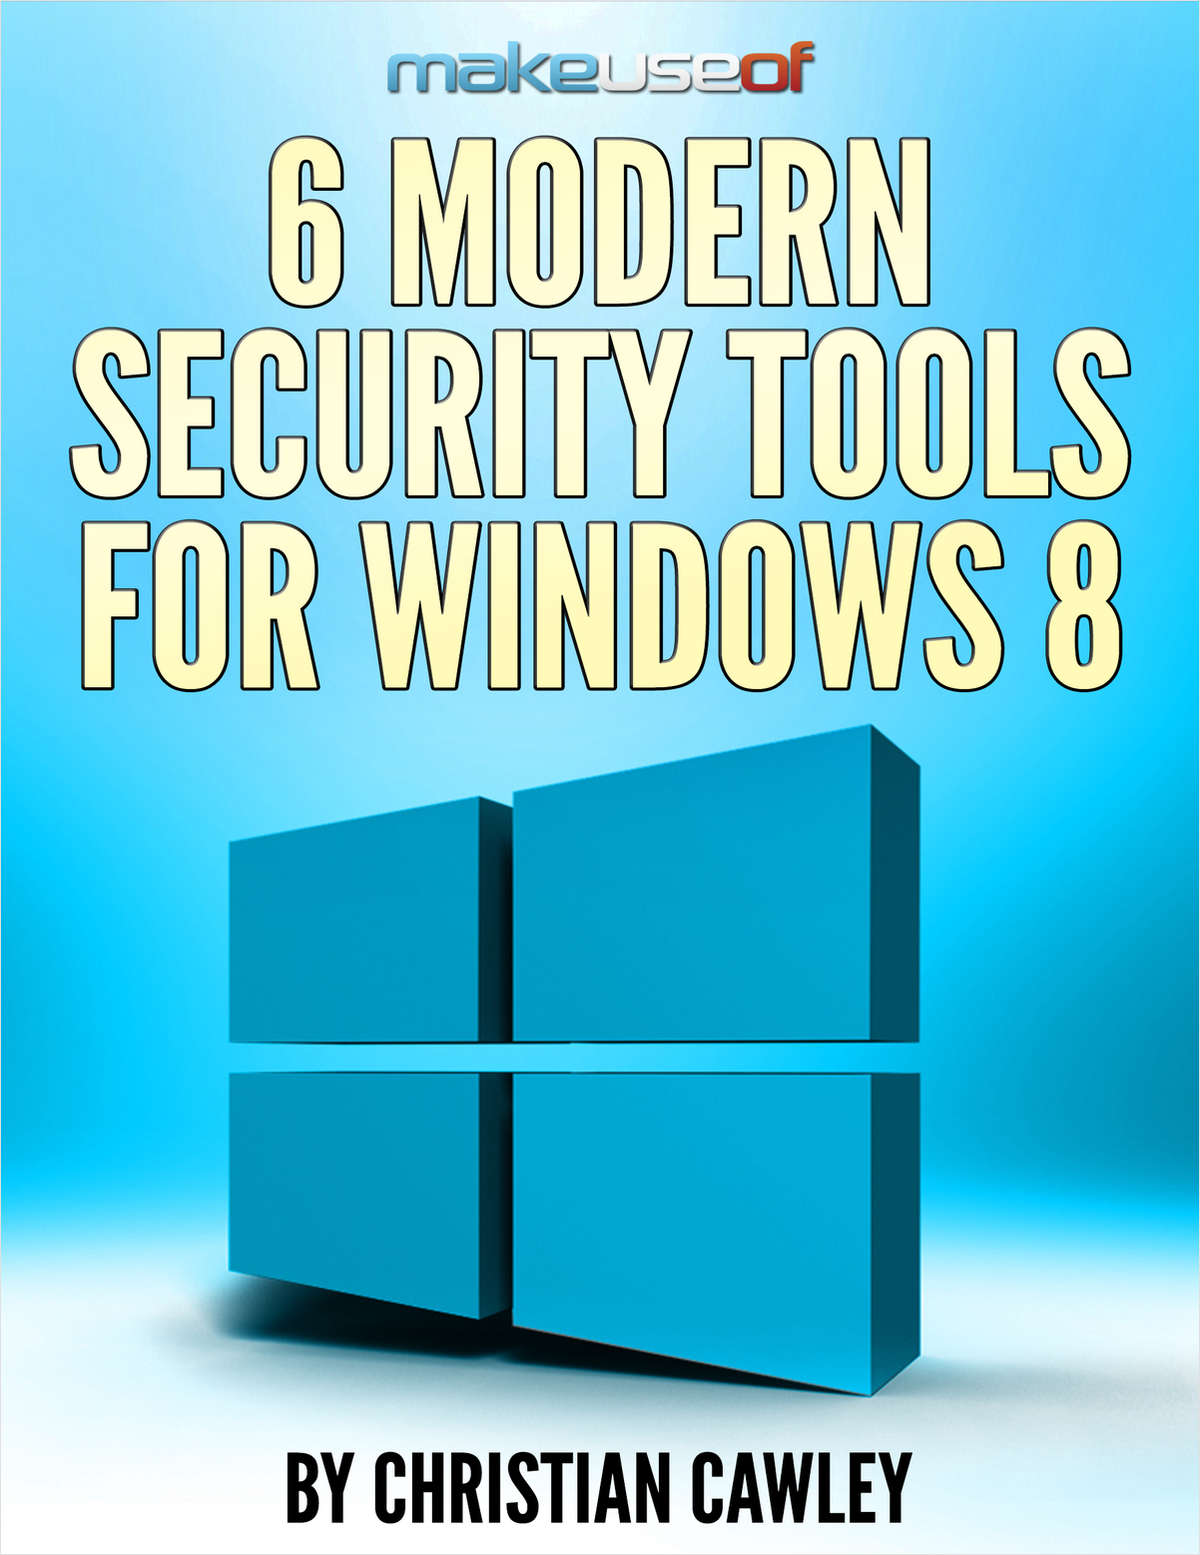 6 Modern Security Tools for Windows 8